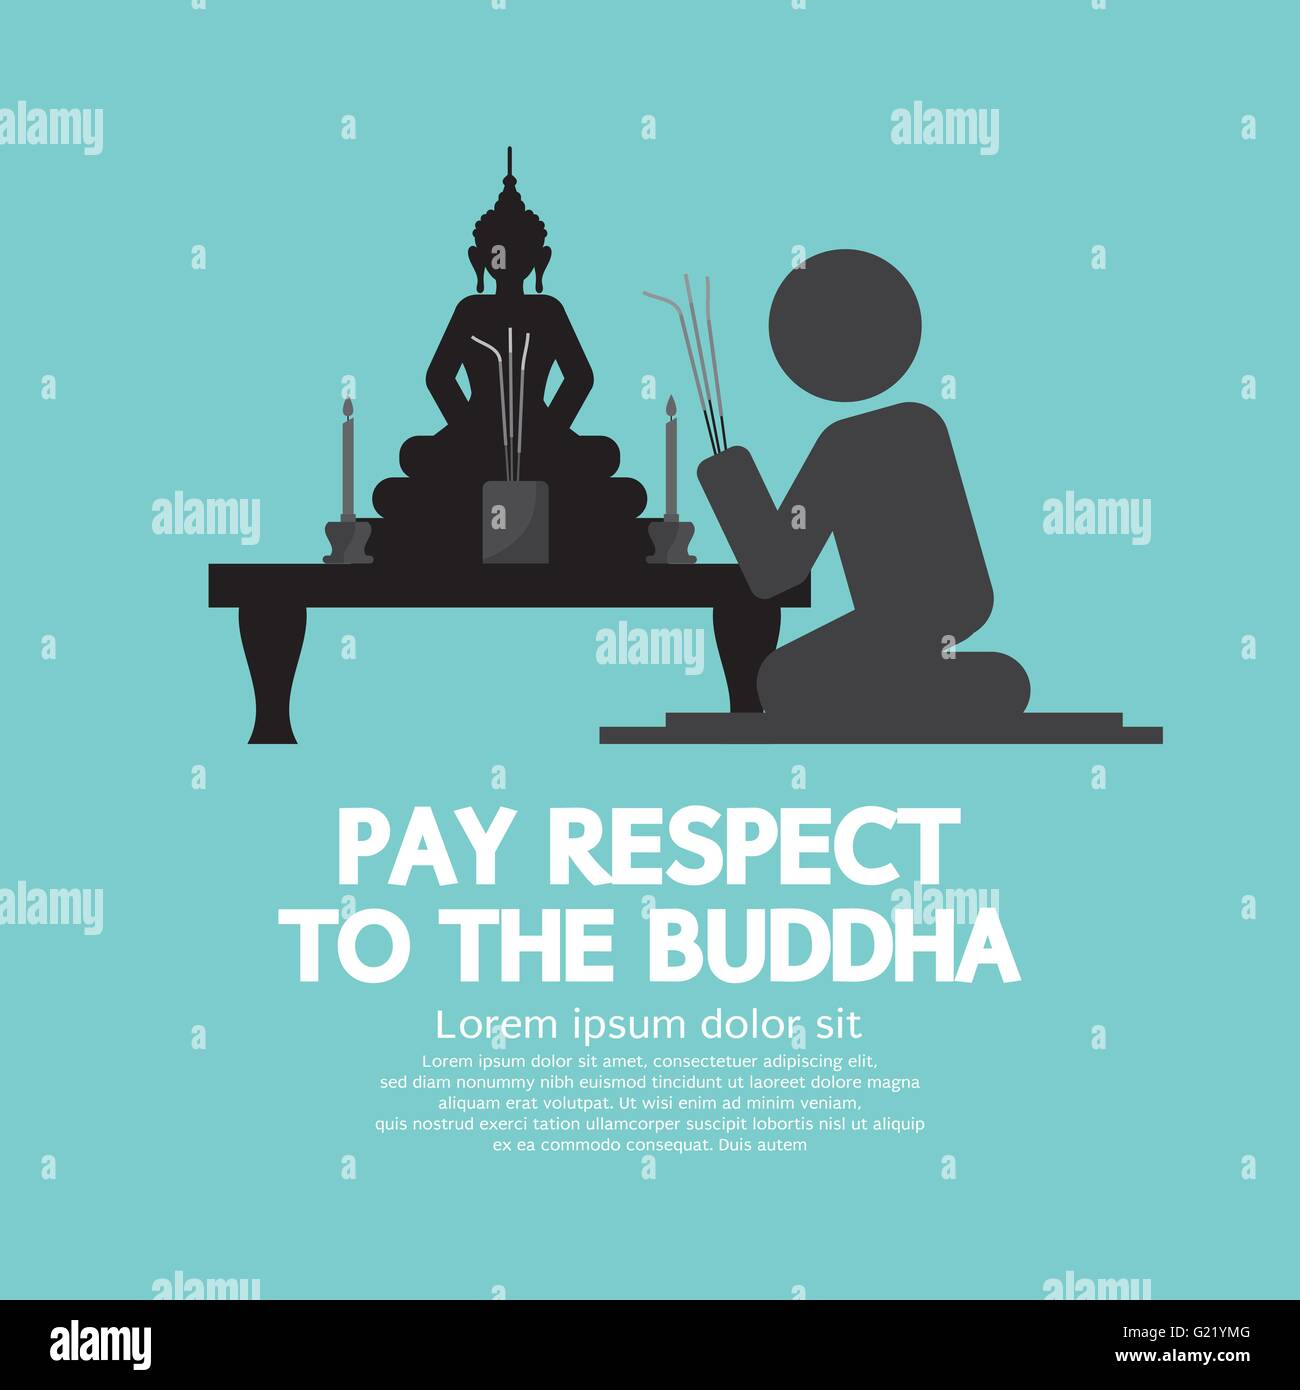 Pay Respect To The Buddha Vector Illustration Stock Vector